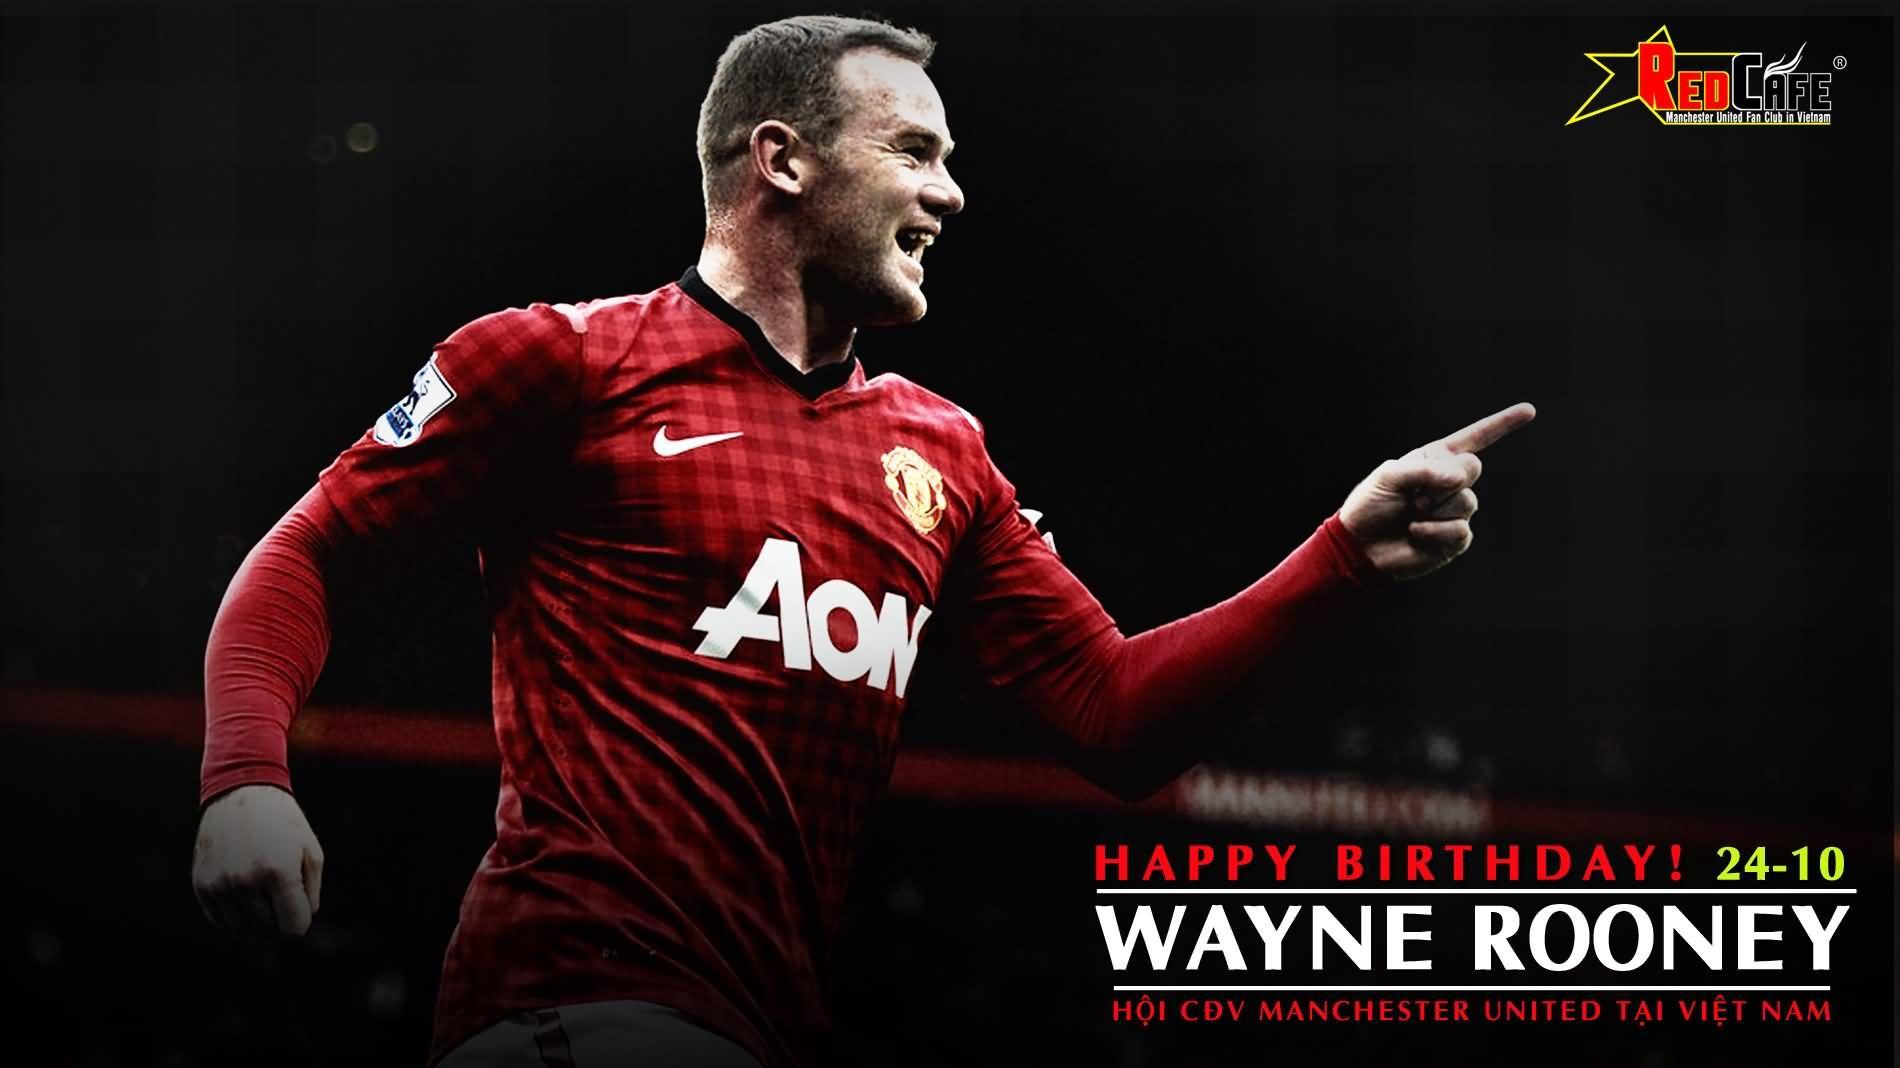 Hd Wallpaper Of Wayne Rooney, Photo, Picture